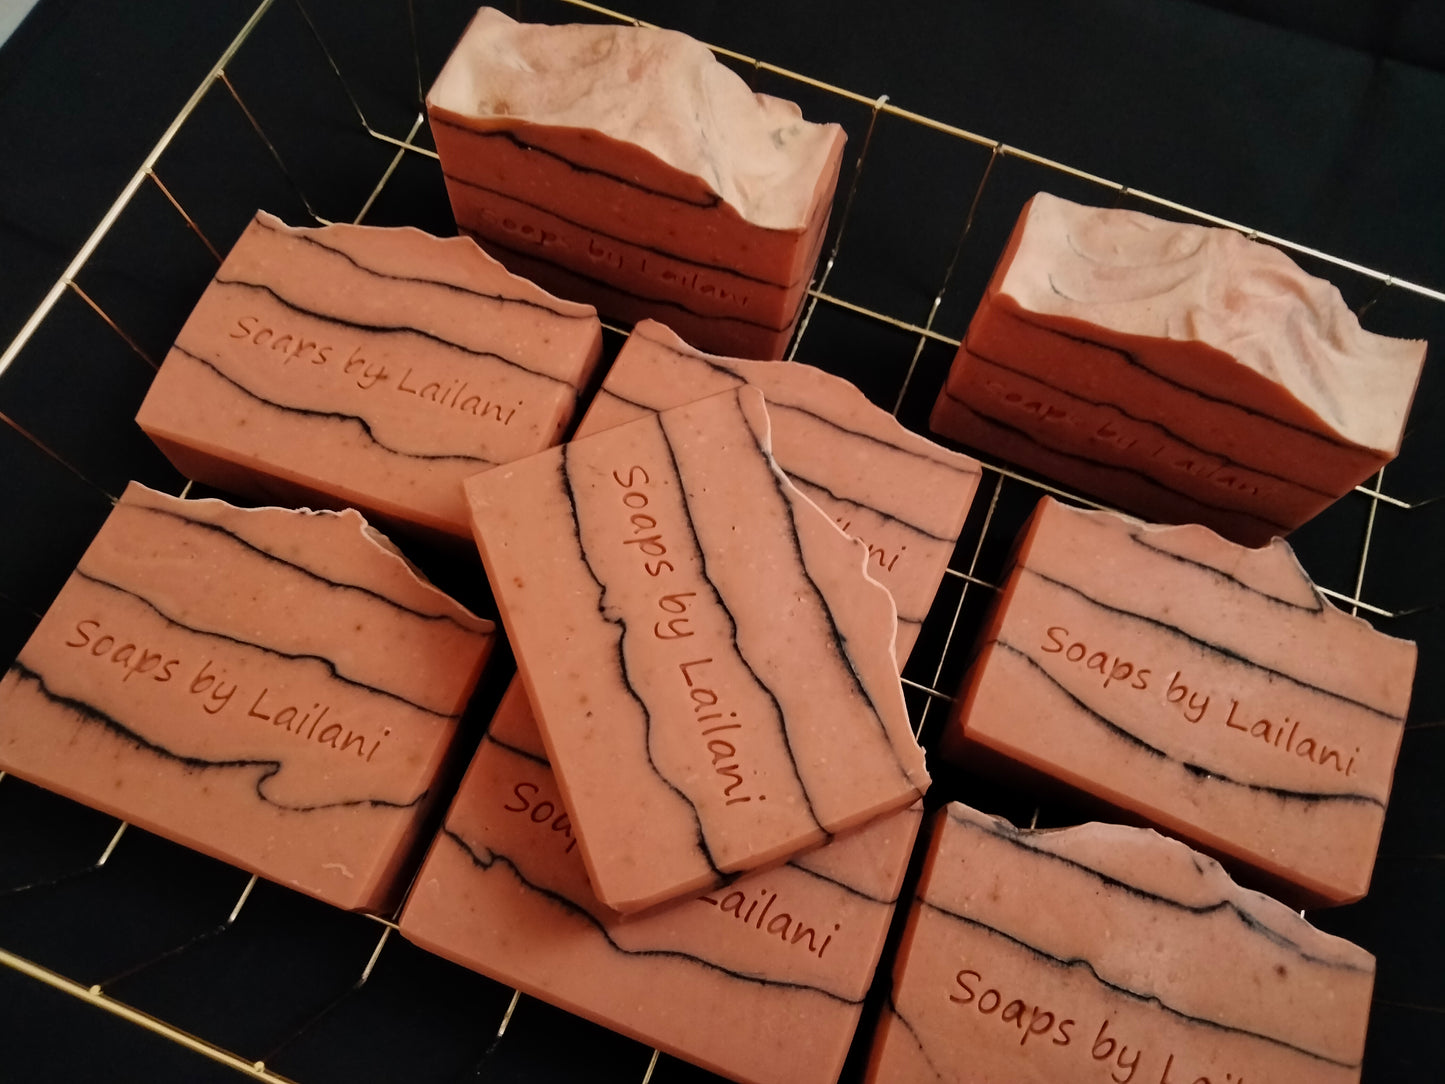 Rose and Charcoal Soap